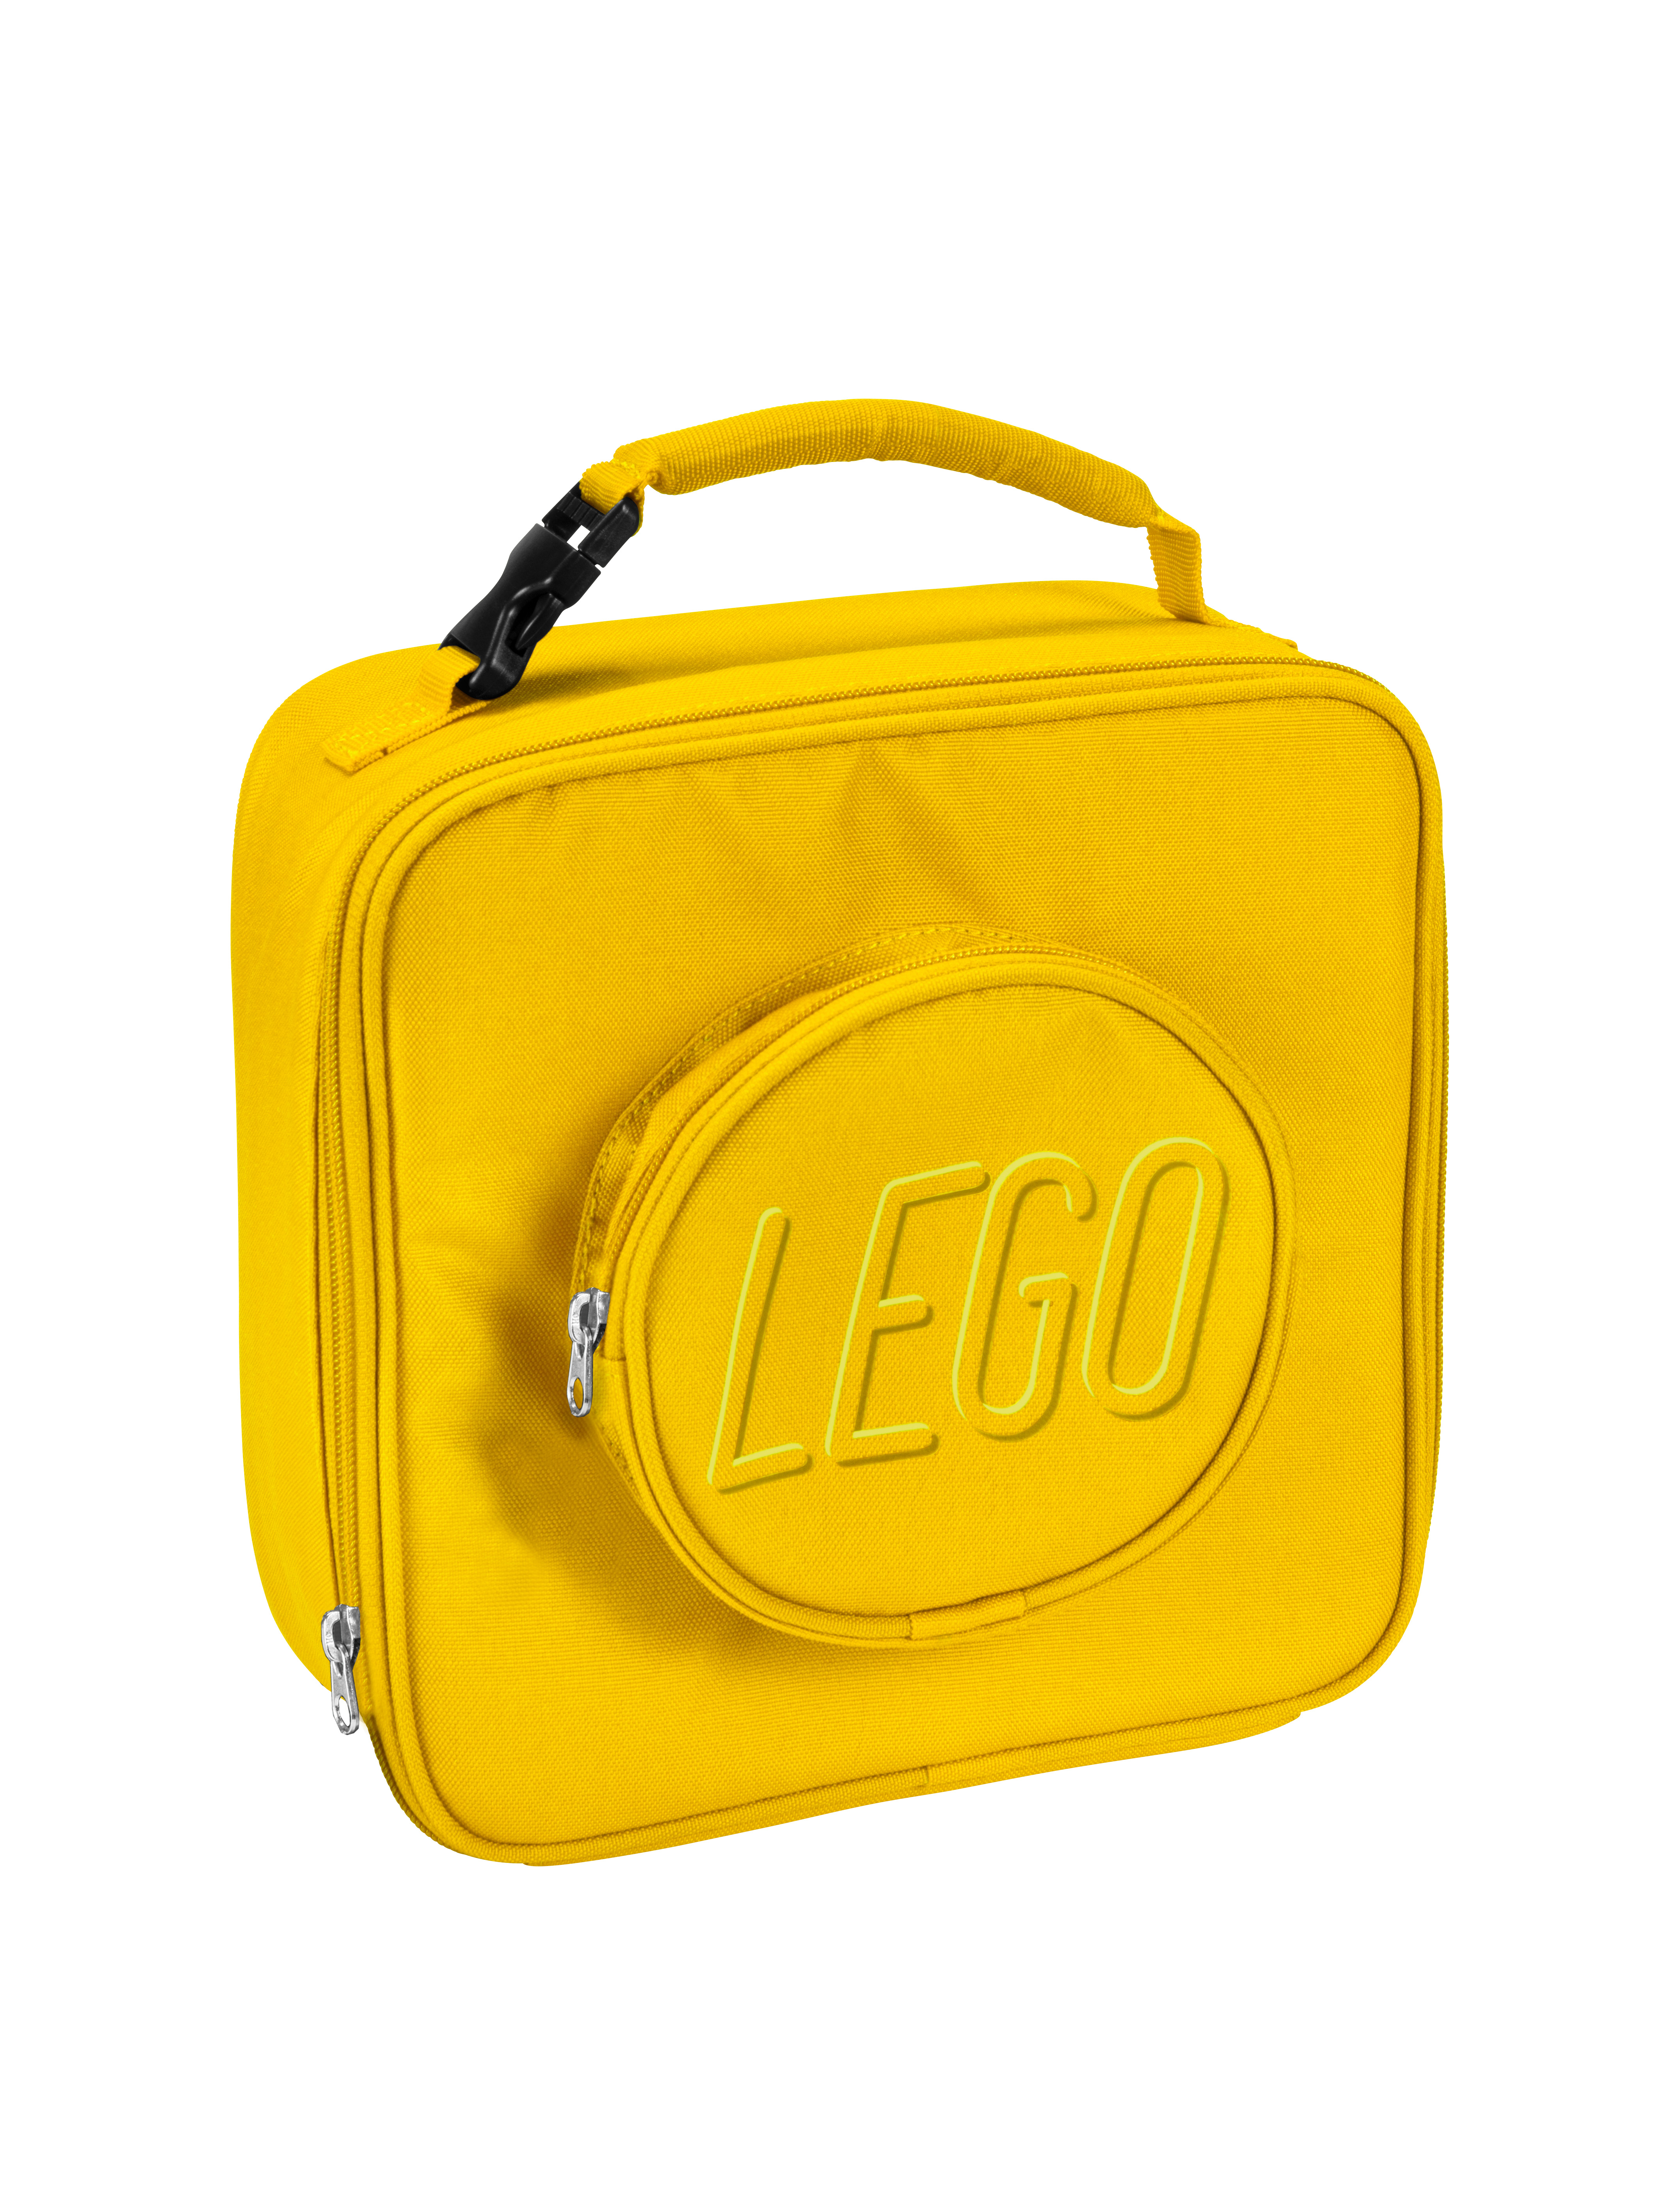  LEGO Kids Classic Heritage Lunch Box, Insulated Soft Reusable Lunch  Bag Meal Container for Boys and Girls, Perfect for School or Travel, Meal  Tote Keeps Food and Drinks Cold with Buckle